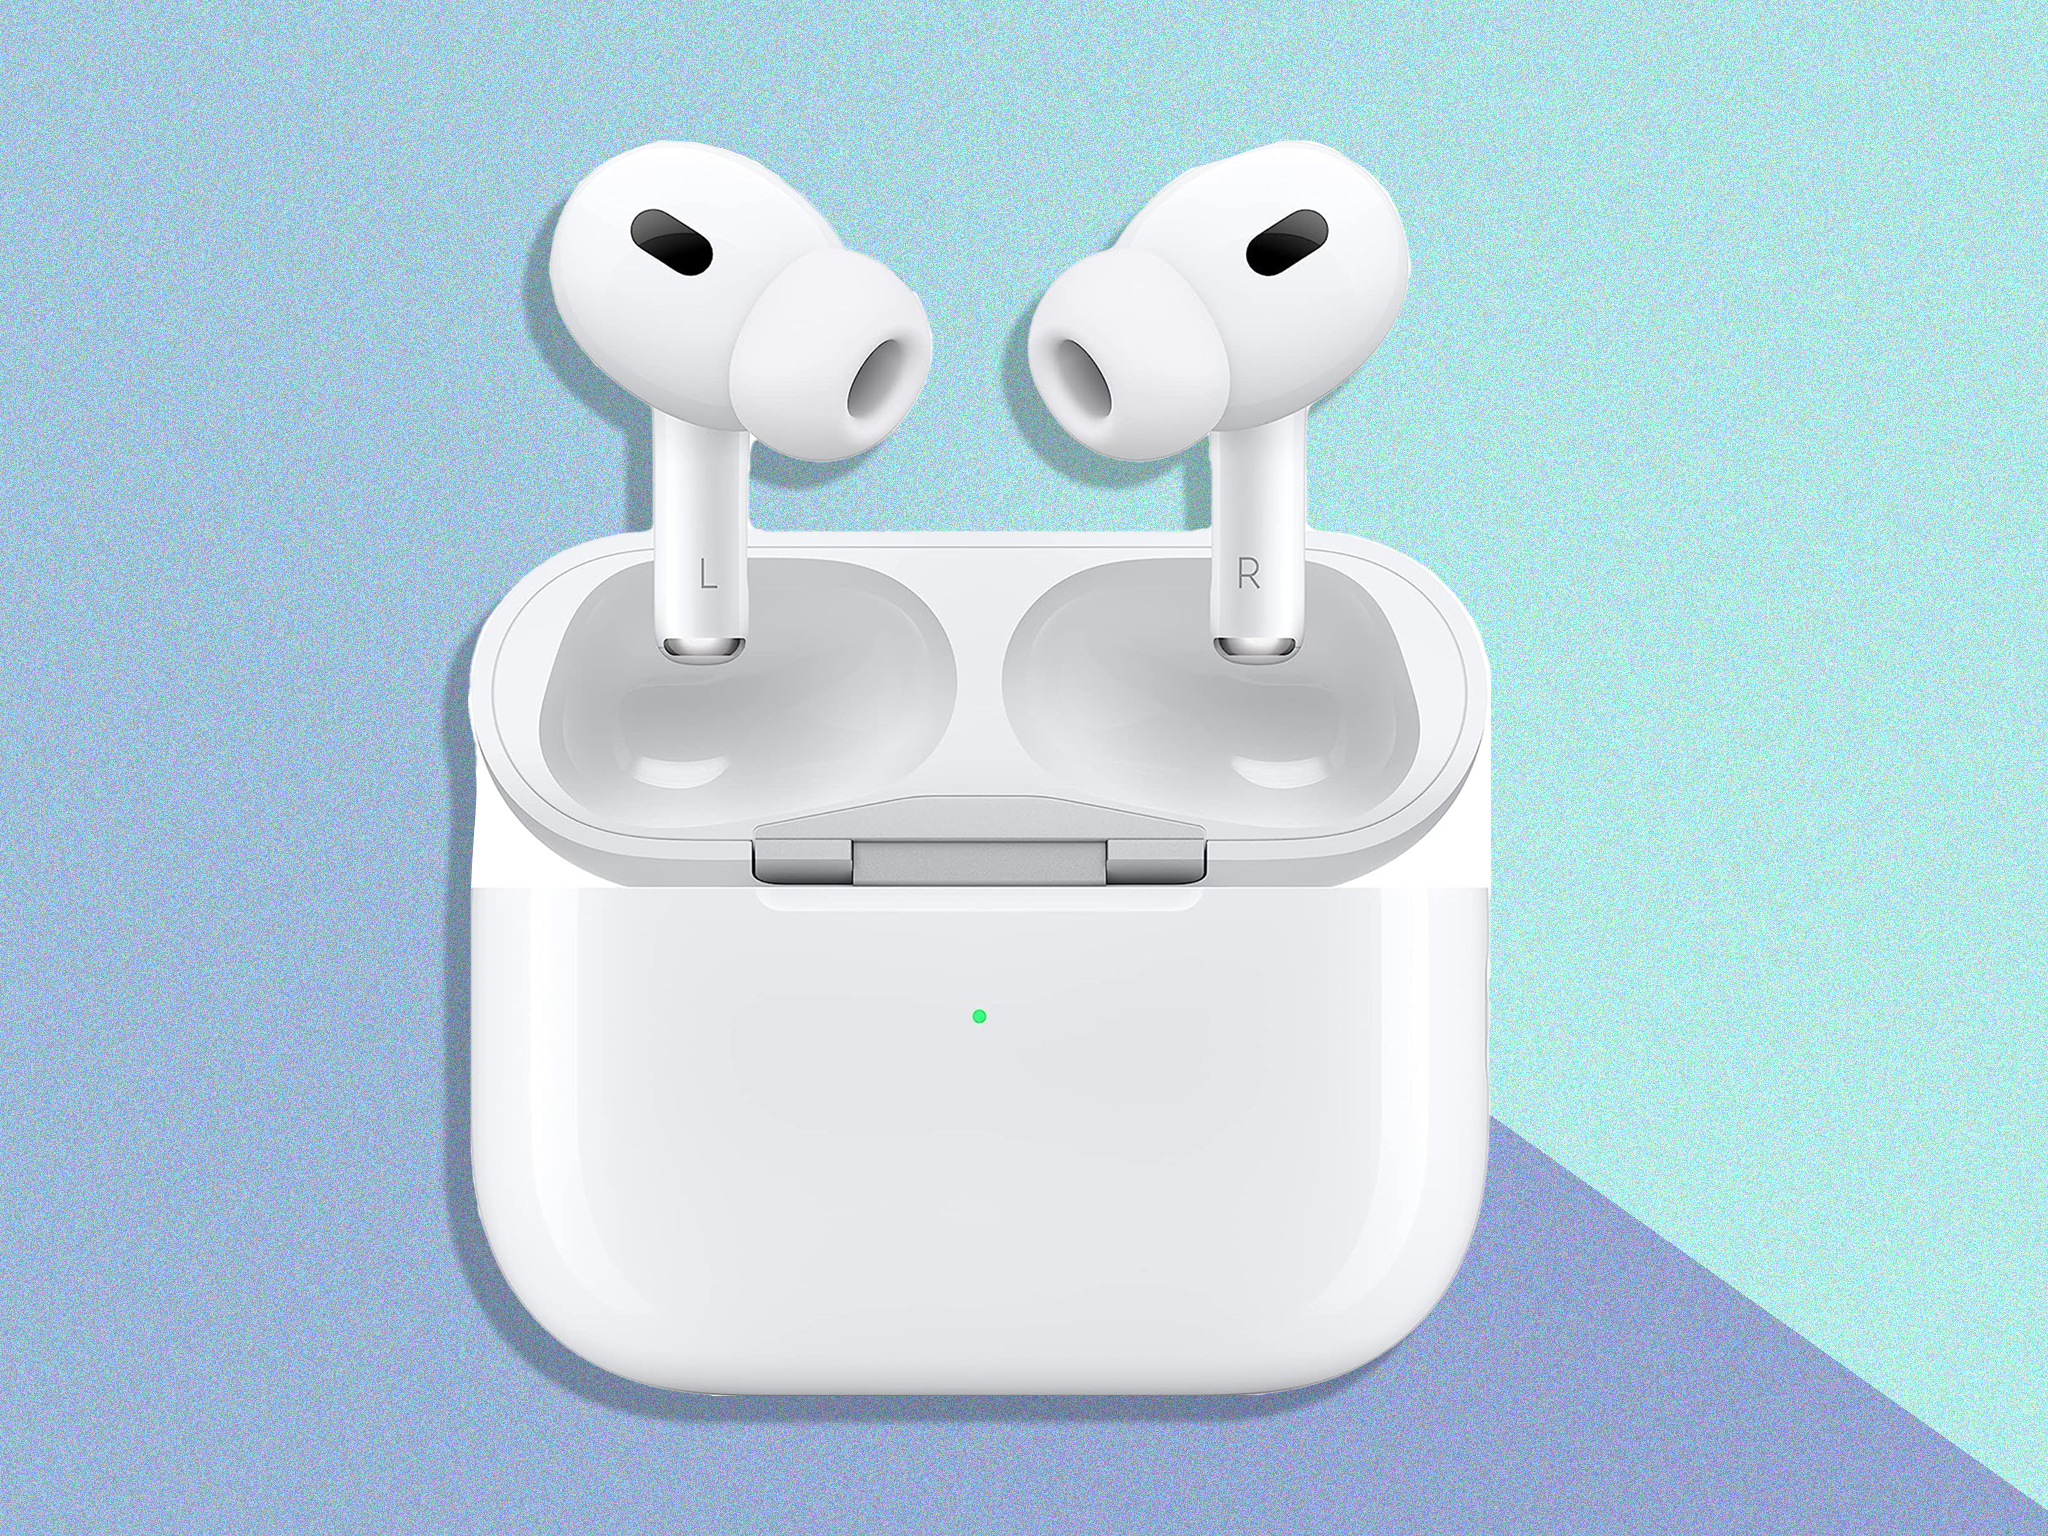 Apple AirPods Pro 2 deal for Amazon Prime Day sees lowest price | The Independent